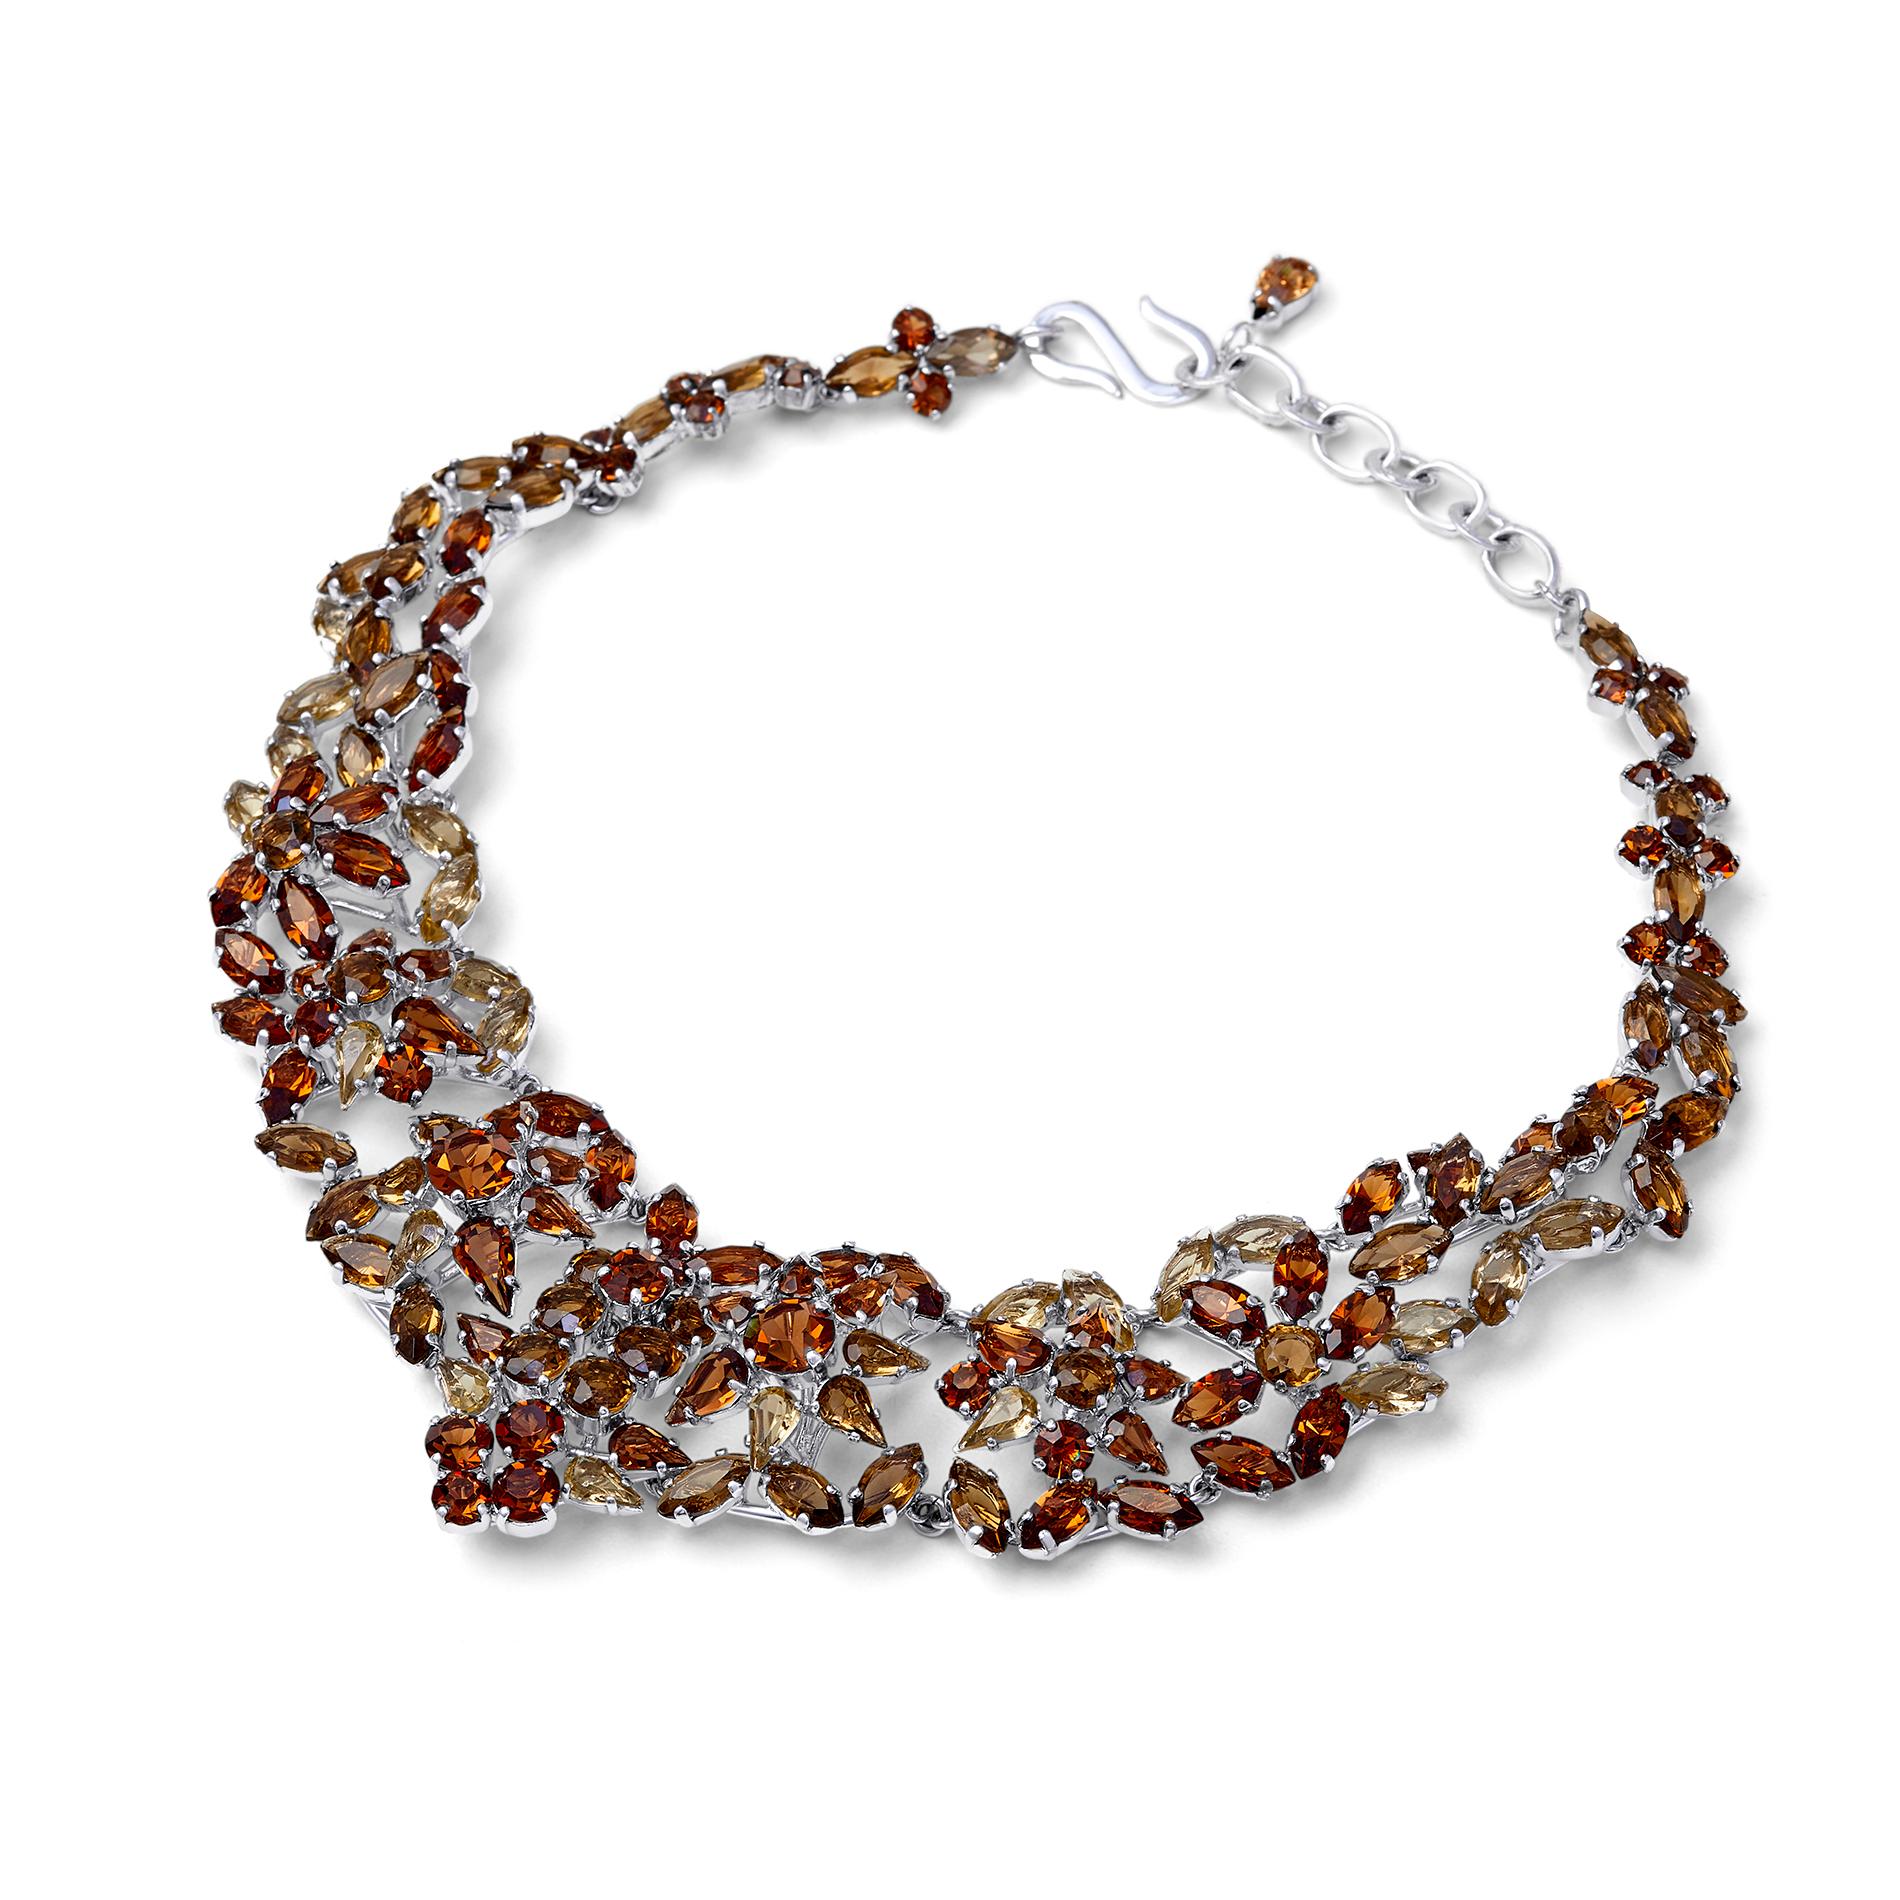 Documented 1950s Christian Dior necklace featuring an assortment of glass crystals in smoky quartz and yellow topaz hues. All stones are claw set into a rhodium plated silver base metal. This piece is a classic princess shape and length and designed